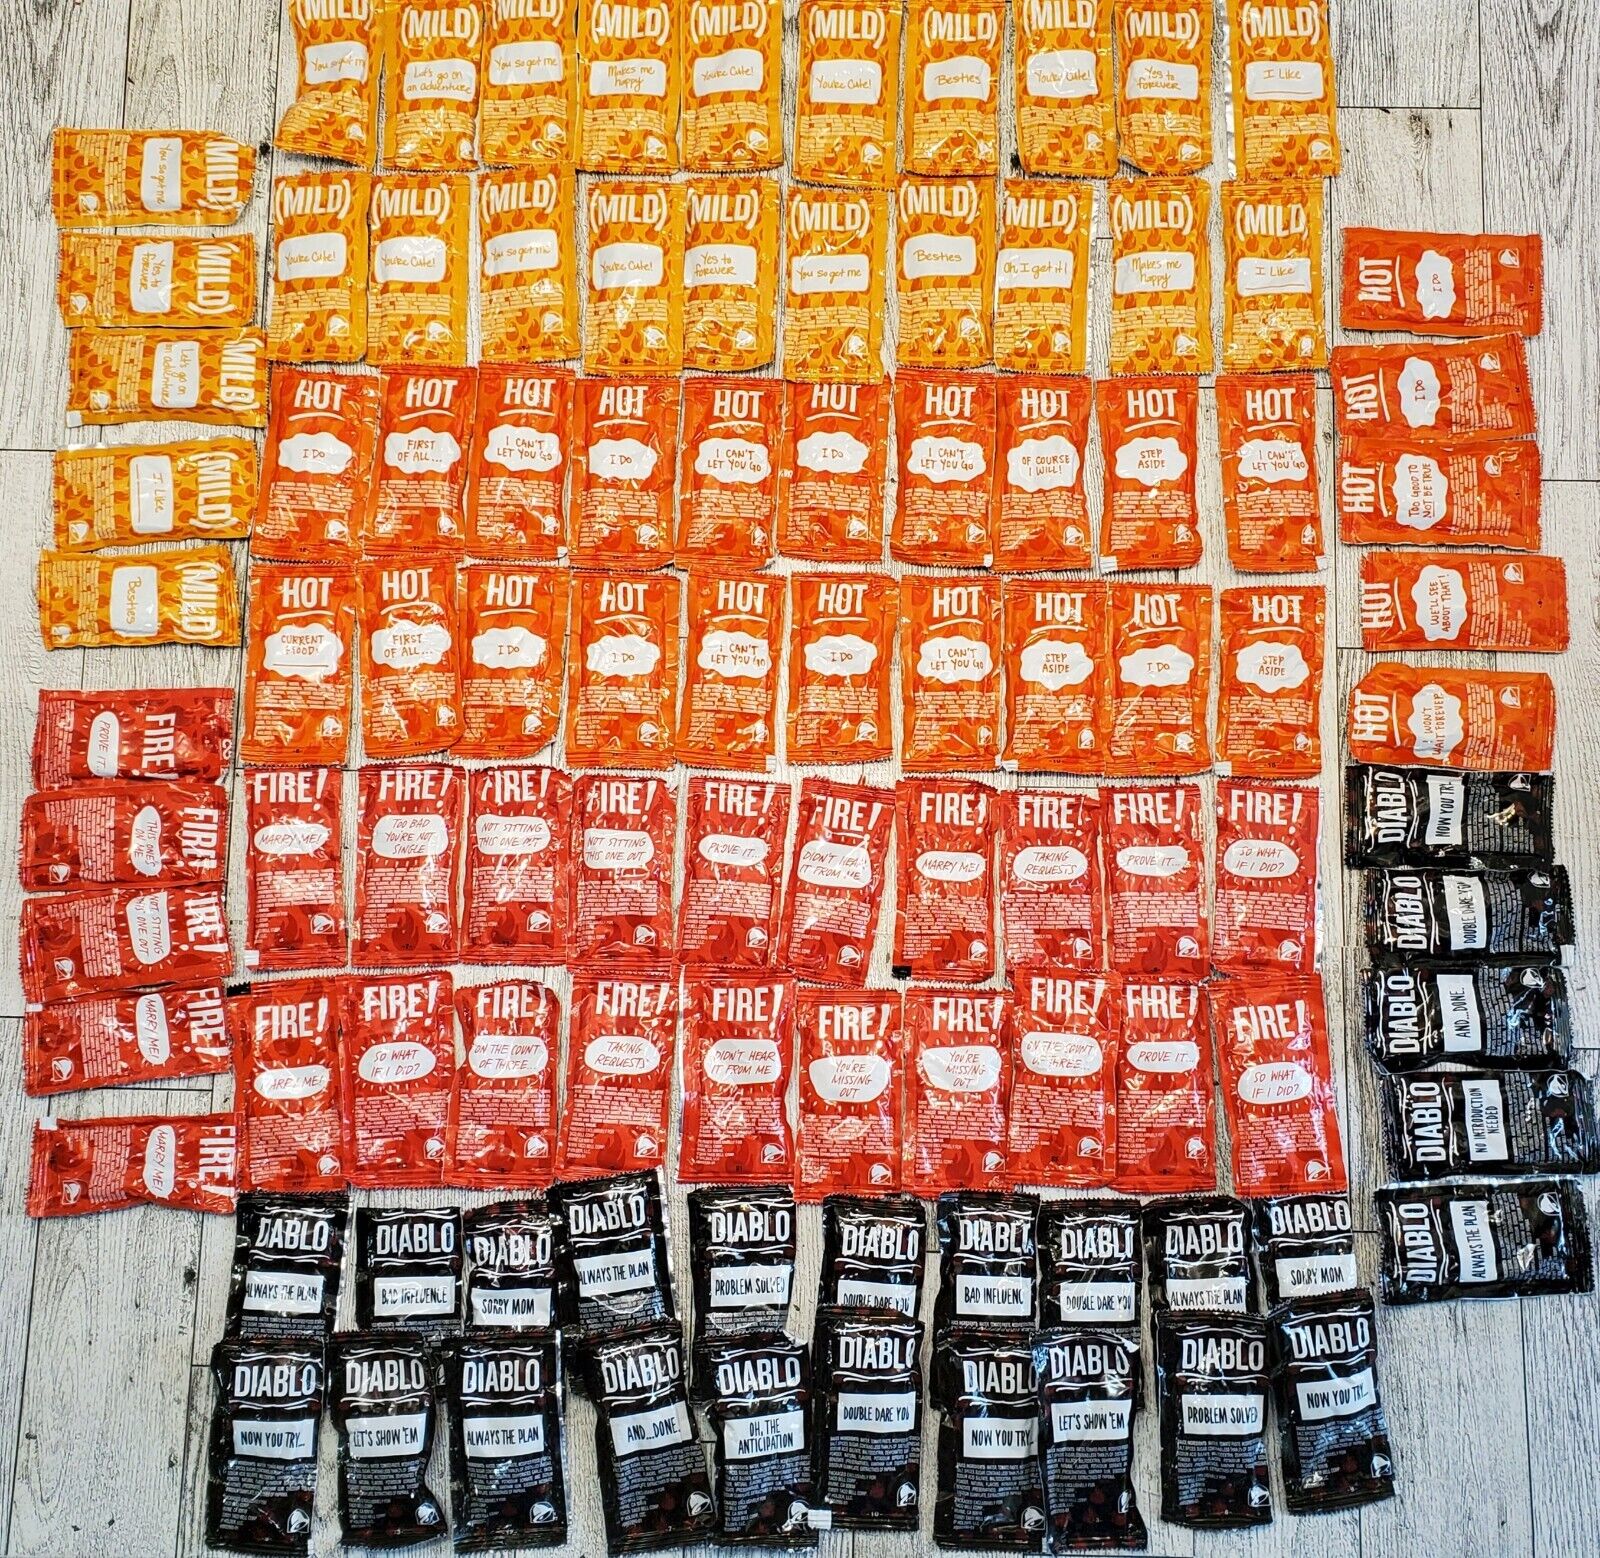 100 Taco Bell Sauce Packets Variety 25 of Each Mild, Hot, Fire & Diablo New